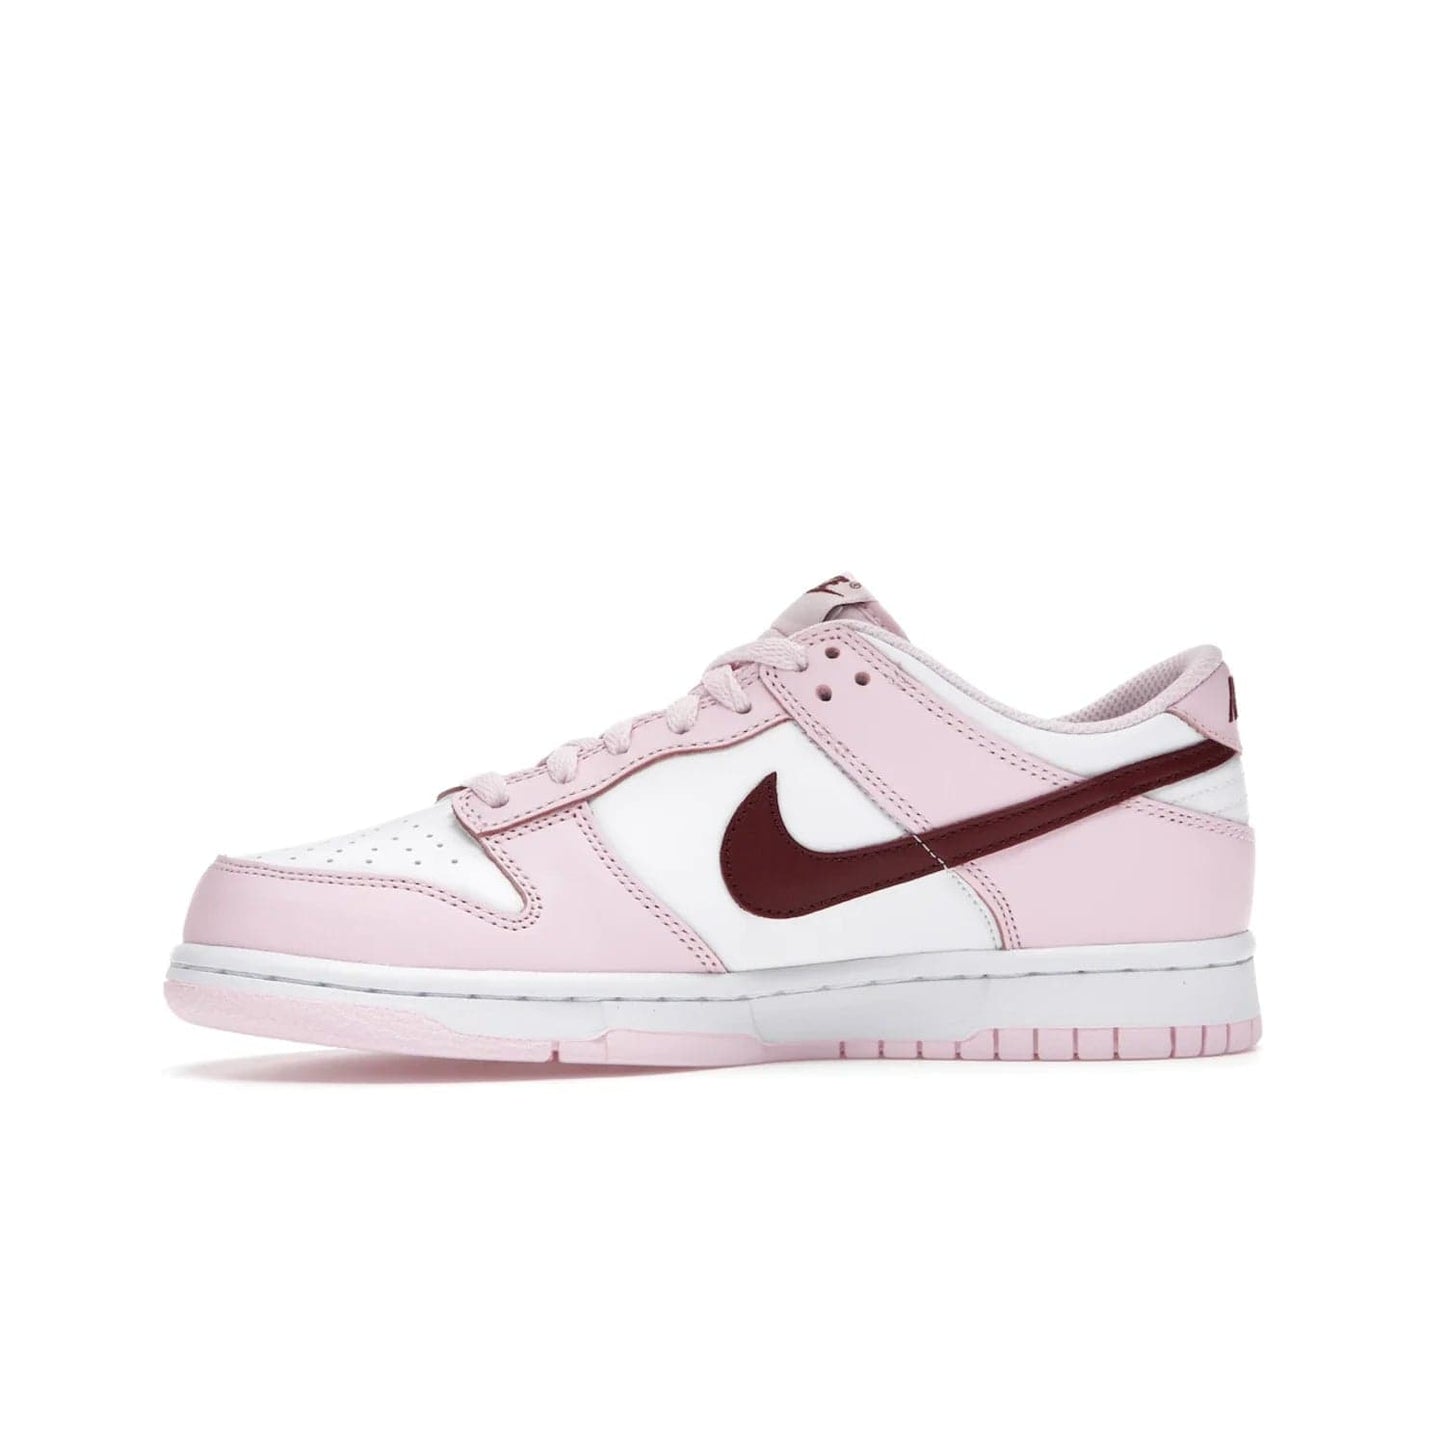 Nike Dunk Low Pink Foam Red White (GS) - Image 18 - Only at www.BallersClubKickz.com - #
Introducing the daring and stylish Nike Dunk Low Pink Foam Red White (GS) sneaker for grade schoolers. White leather with pink overlays and Dark Beetroot accents, classic Nike Dunk midsole and pink outsole. Released August 2021 for $85.